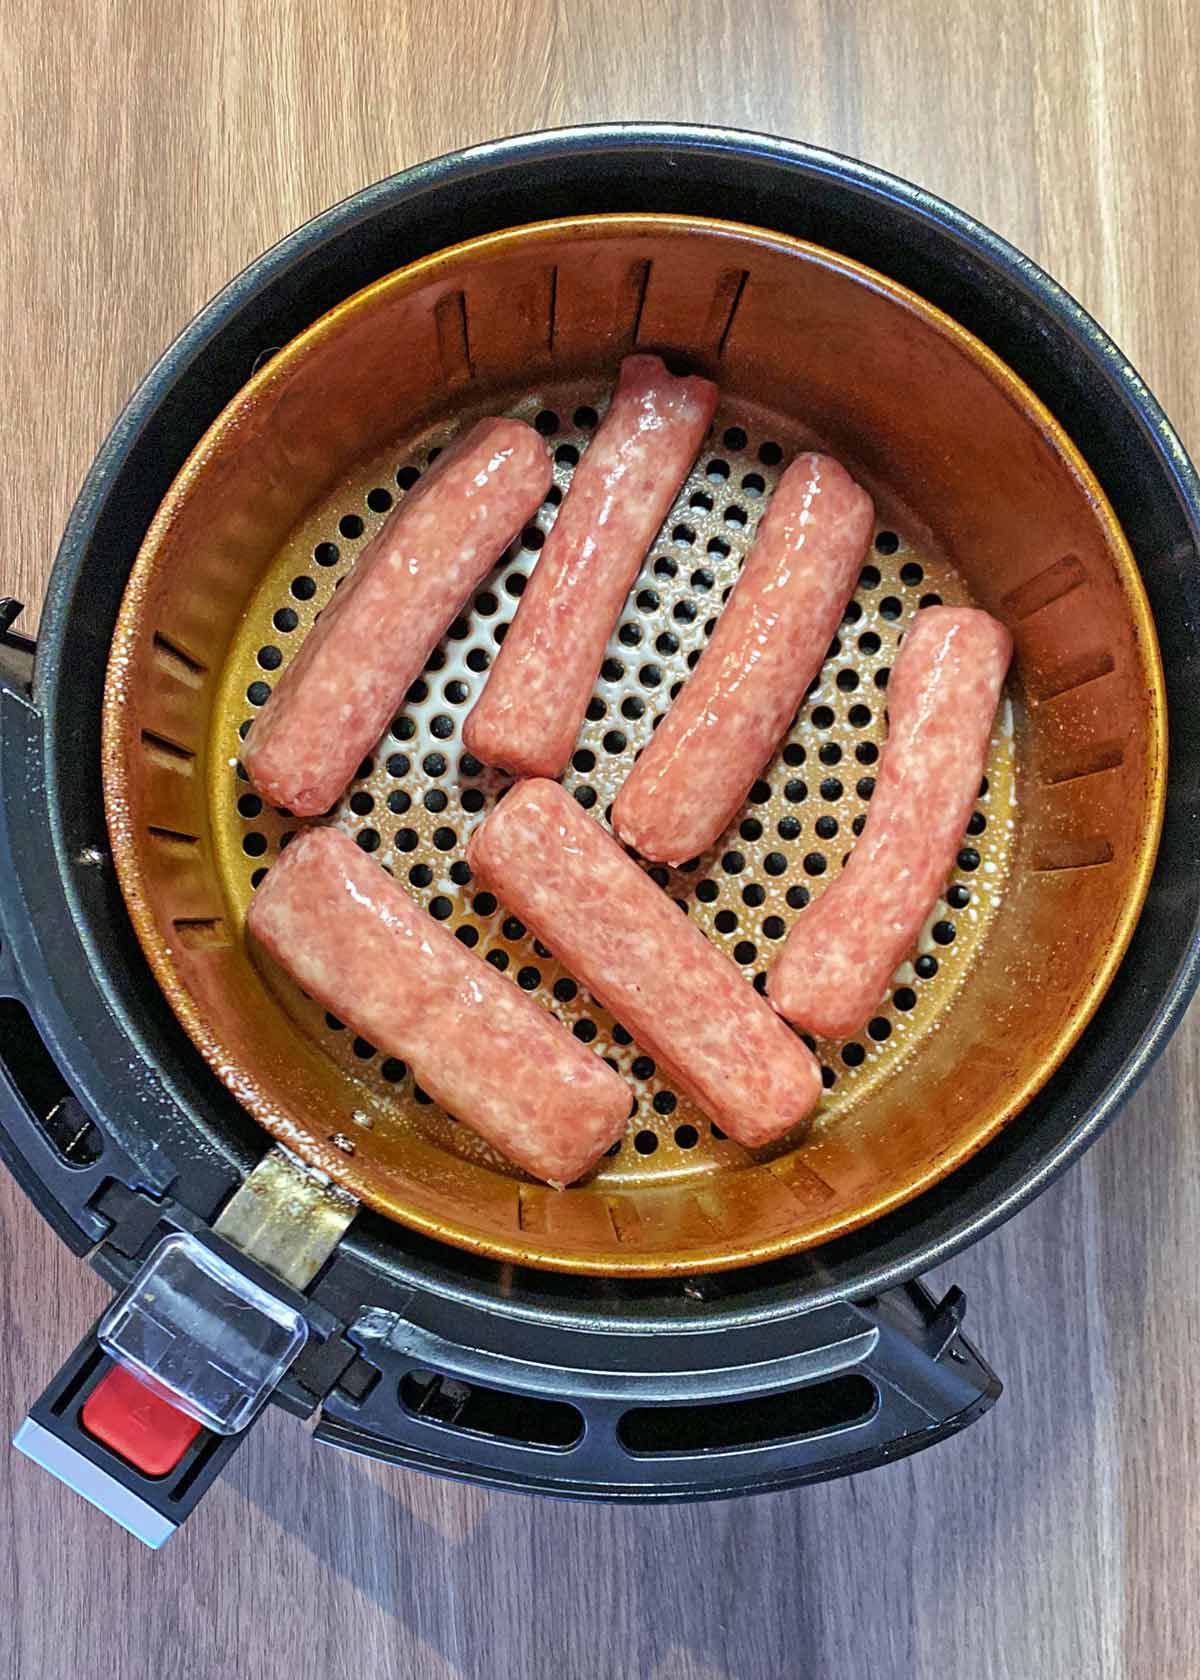 Six raw sausages in an air fryer basket.